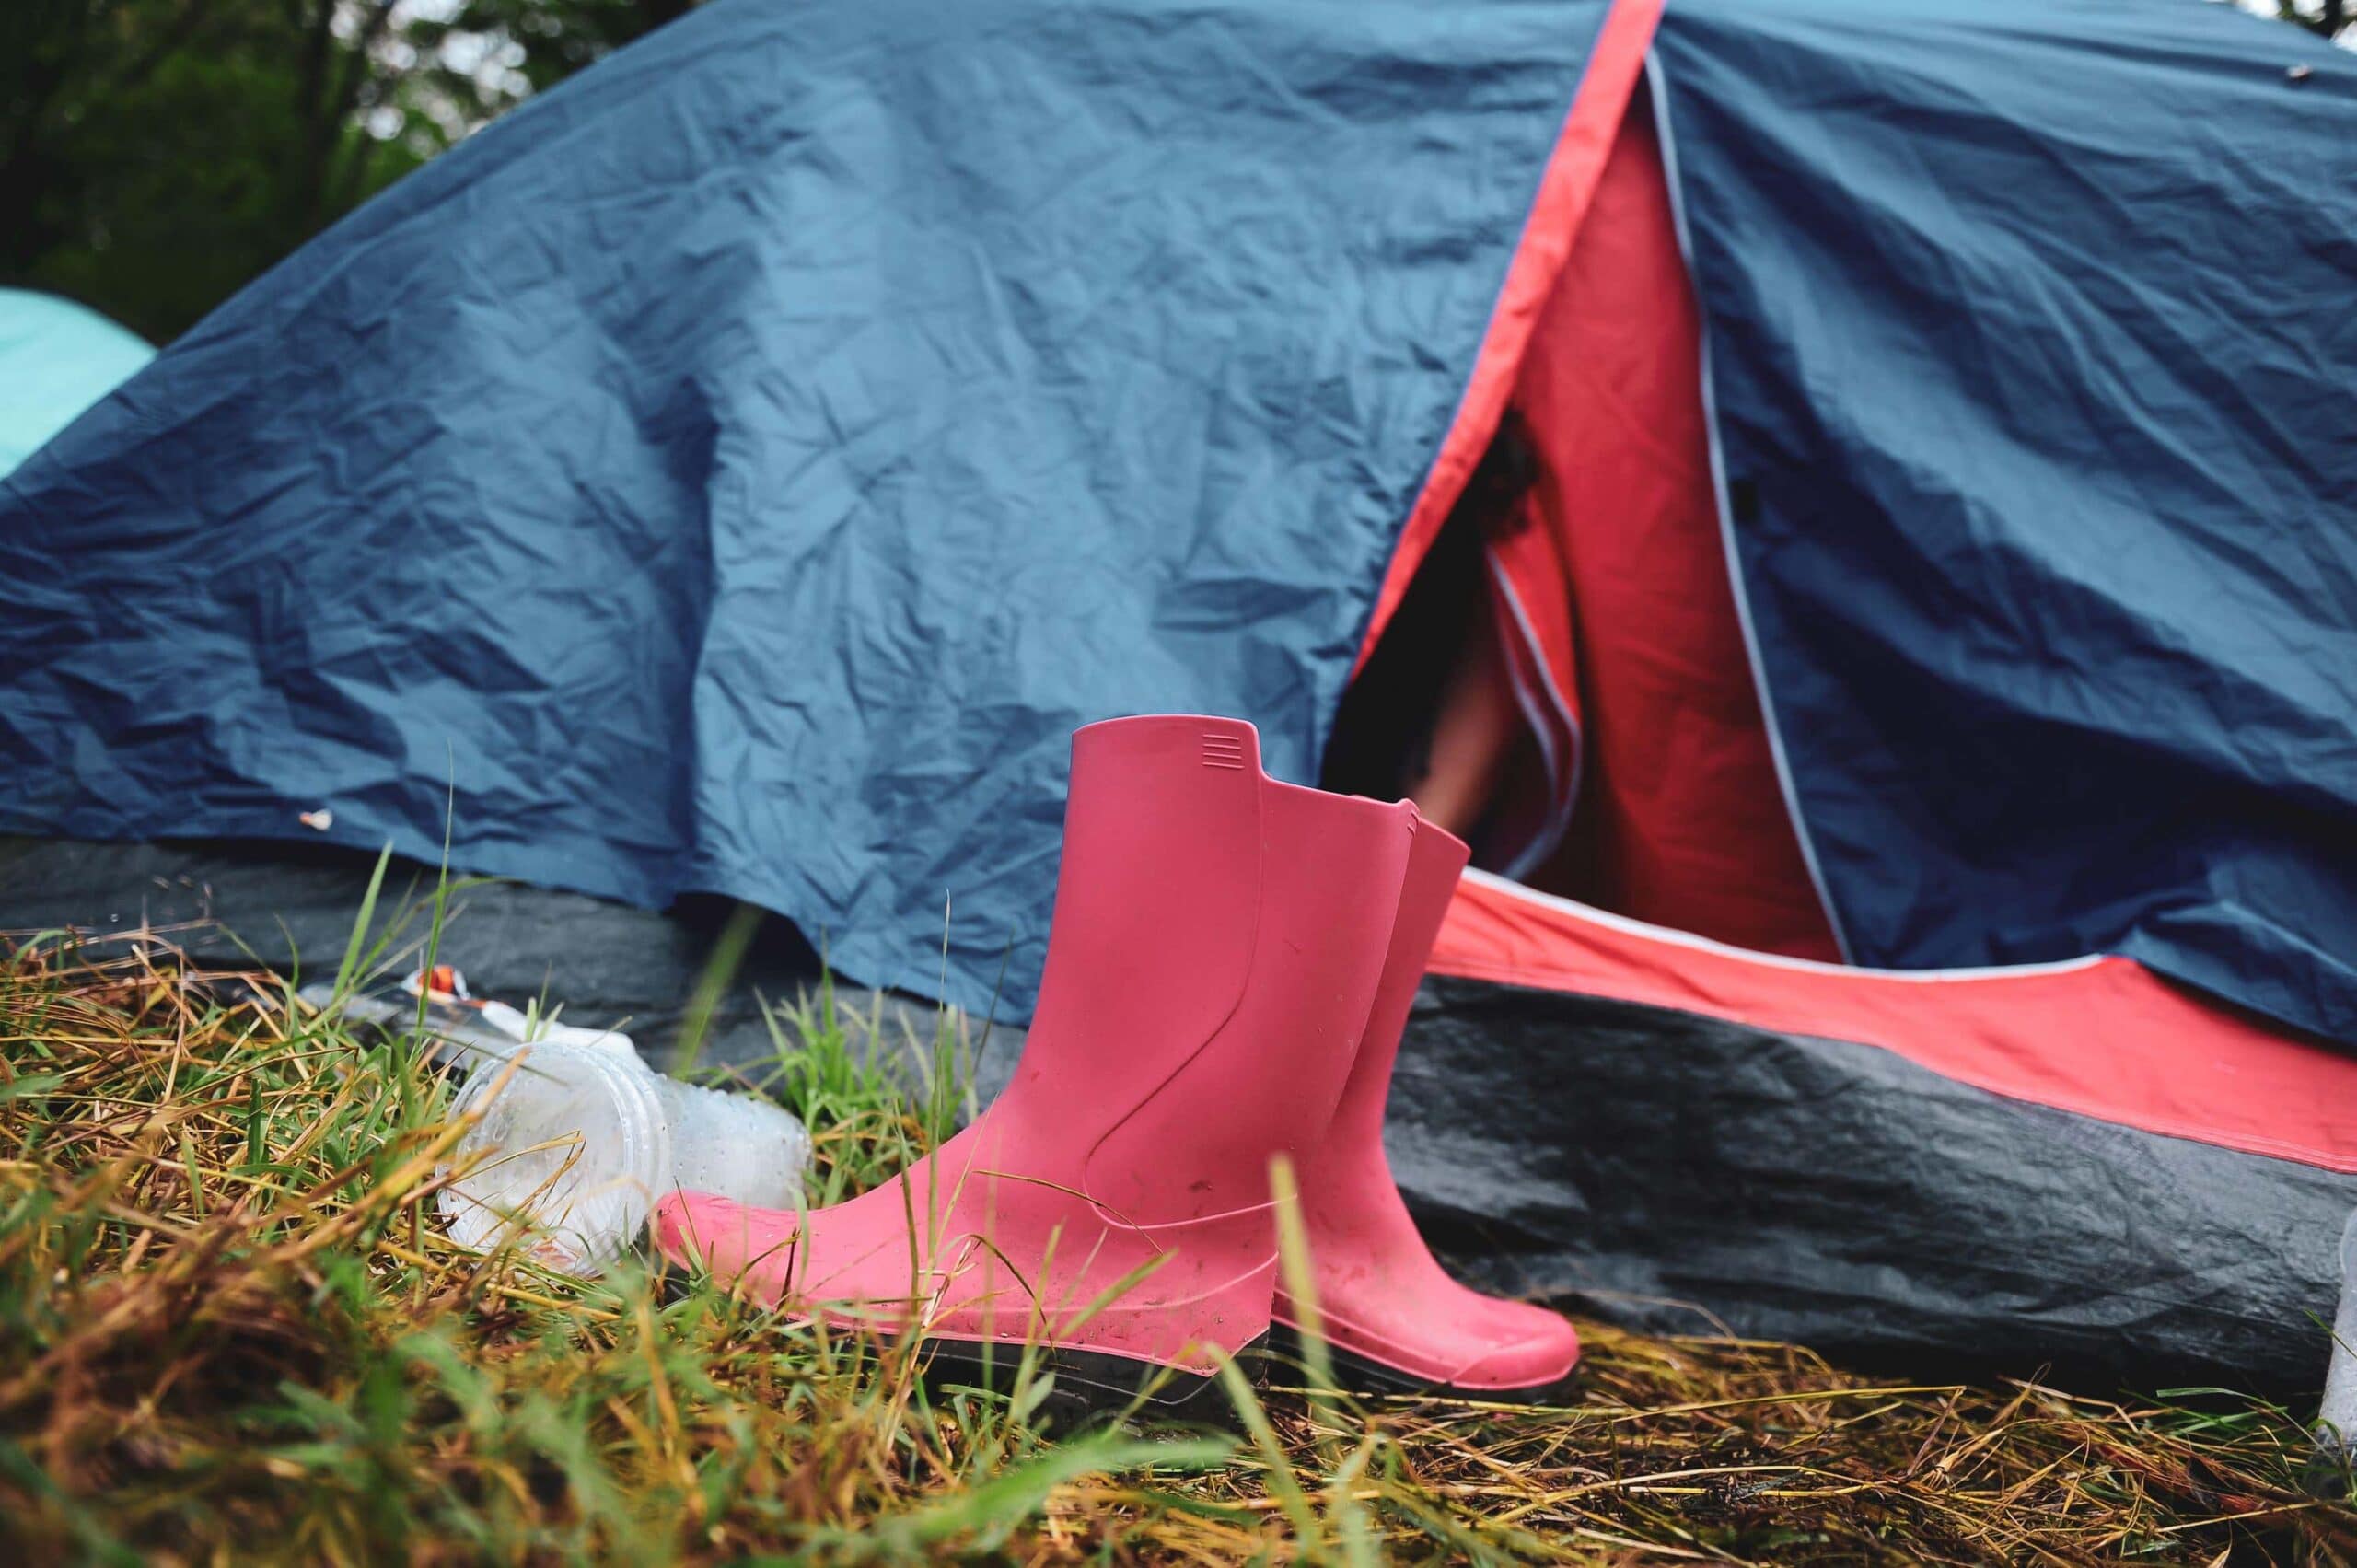 wellies outside a tent scaled